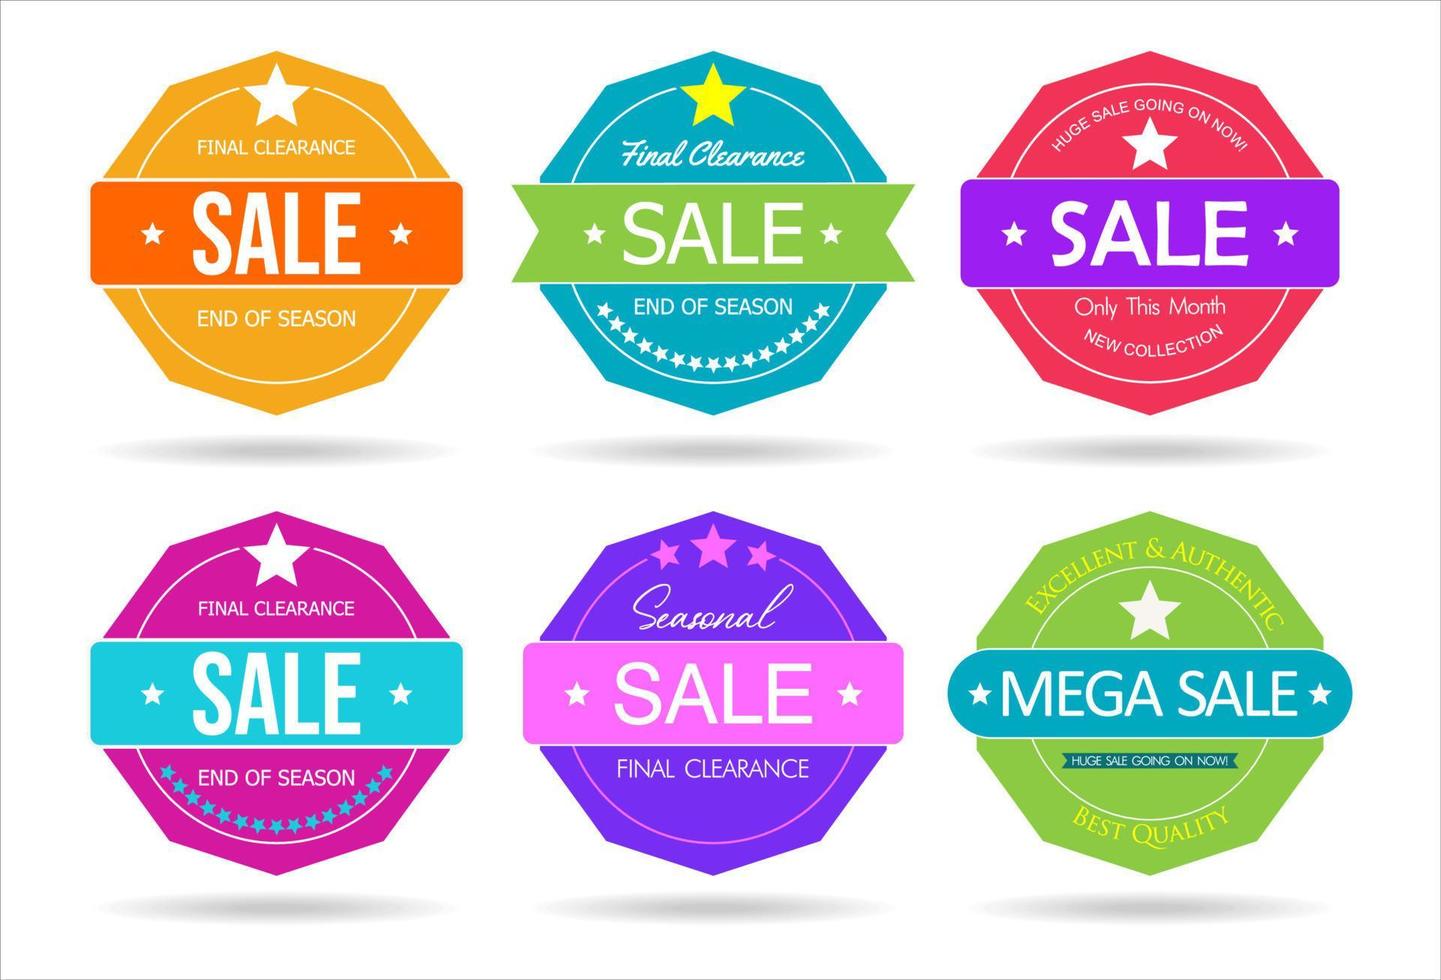 Modern super sale stickers and tags colorful collection vector